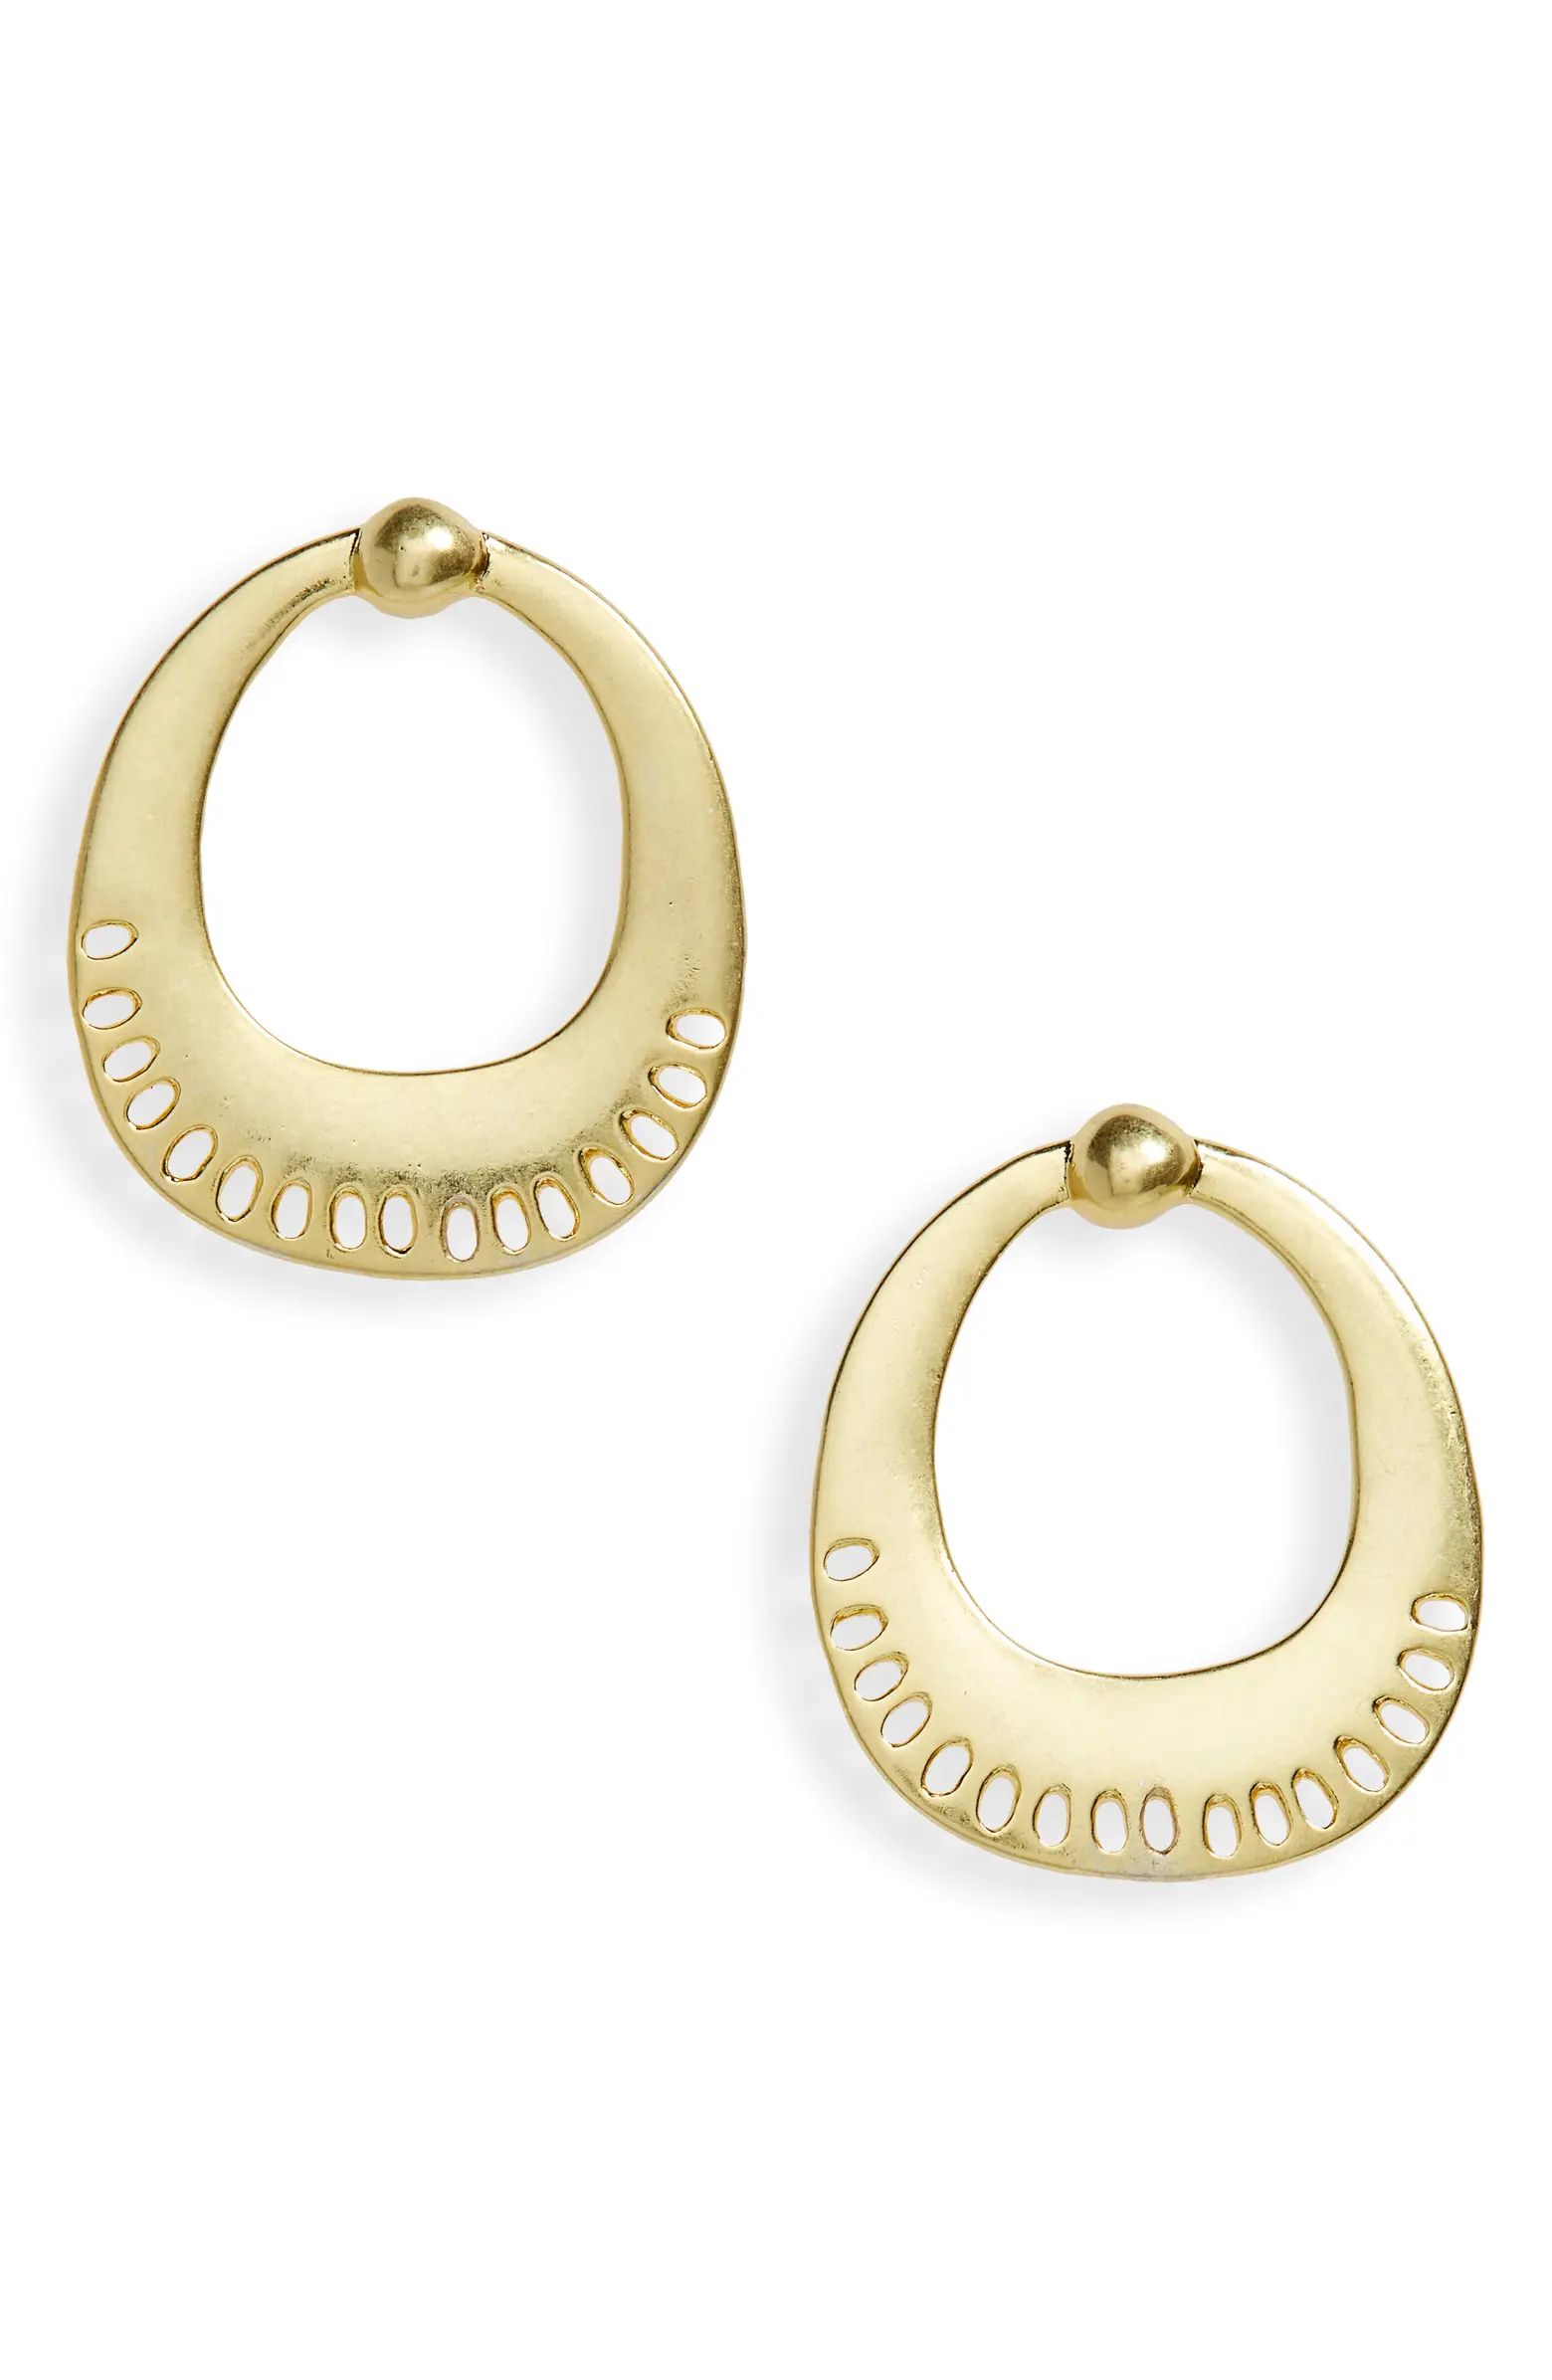 Eyelet Lace Statement Earrings | Nordstrom